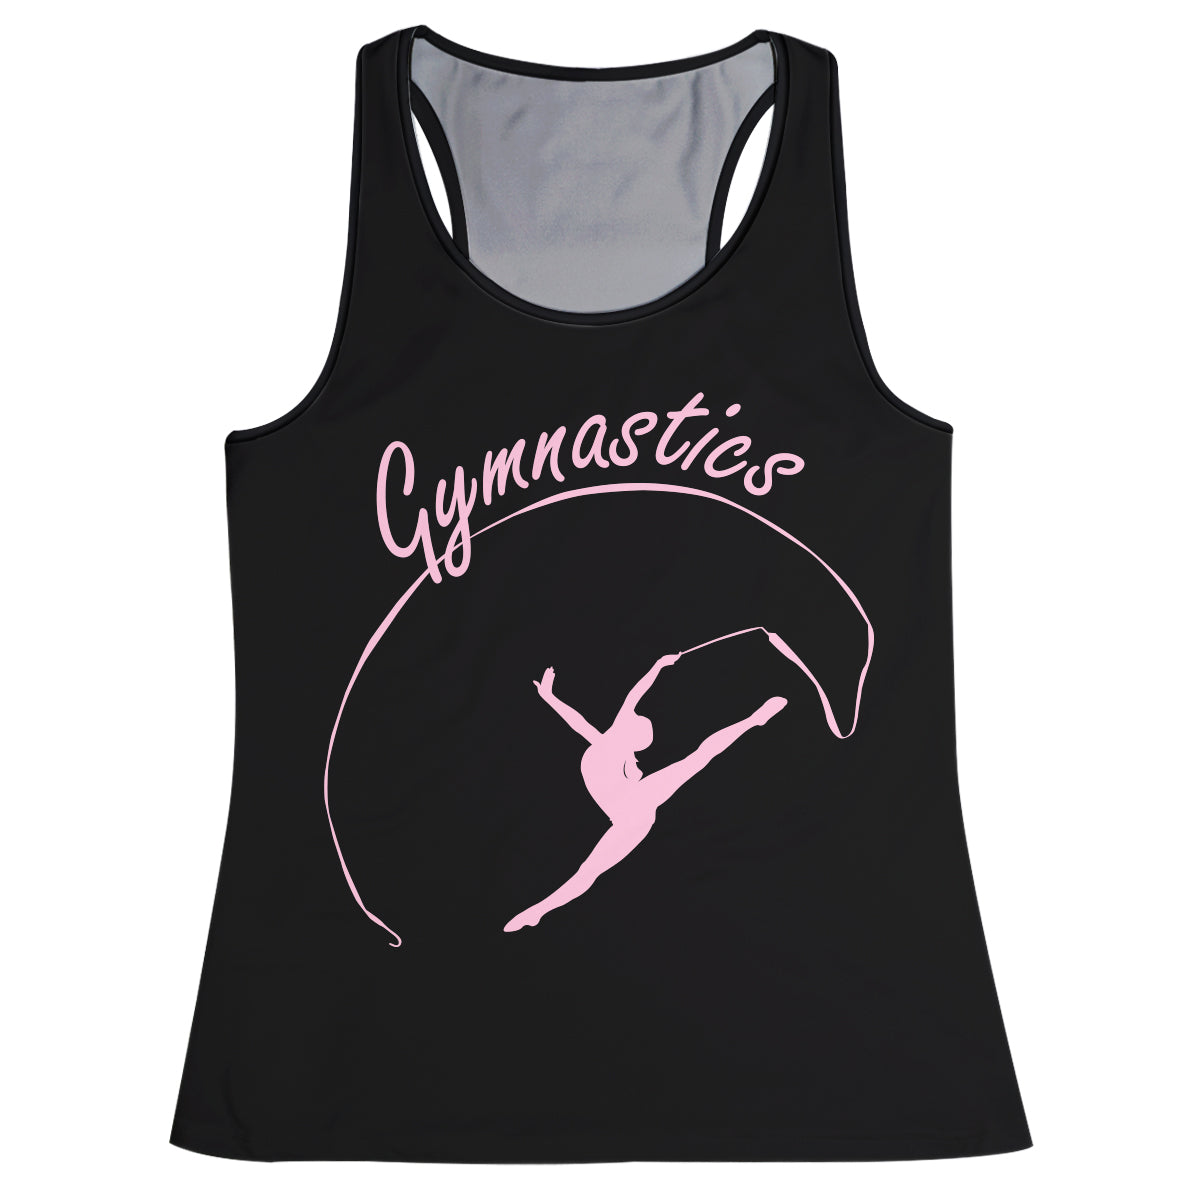 Black and pink gymnast silhouette girls tank top - Wimziy&Co.